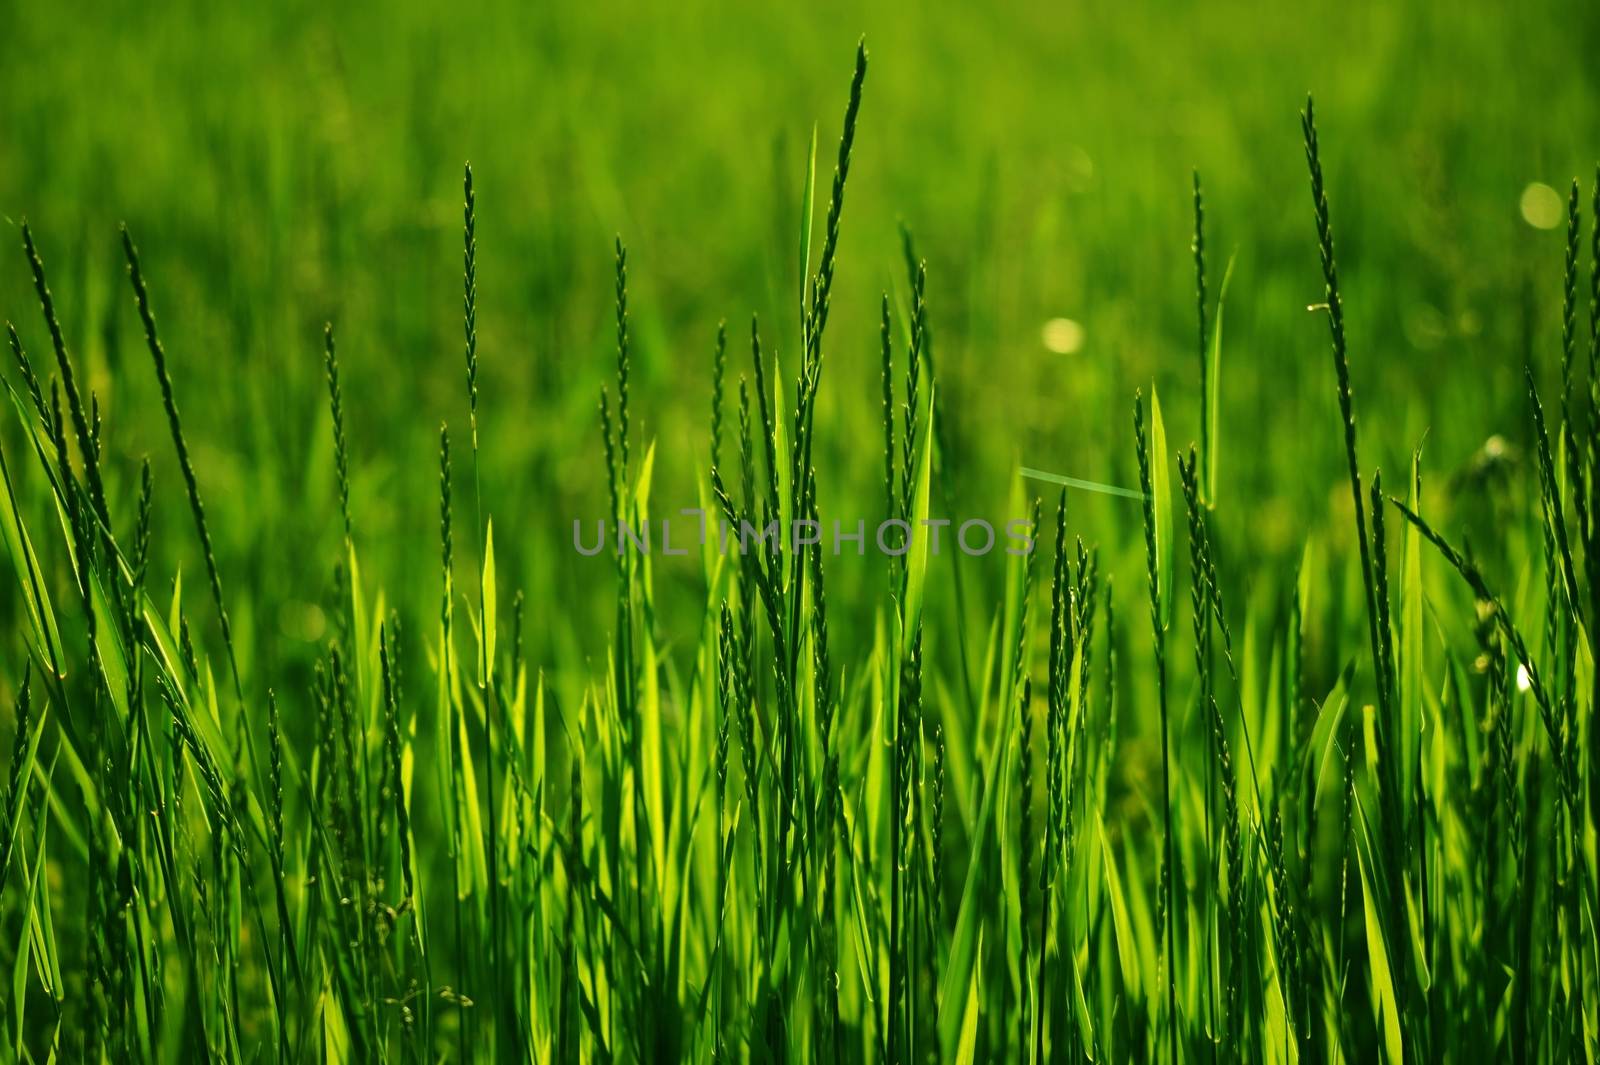 Summer Grass by welcomia